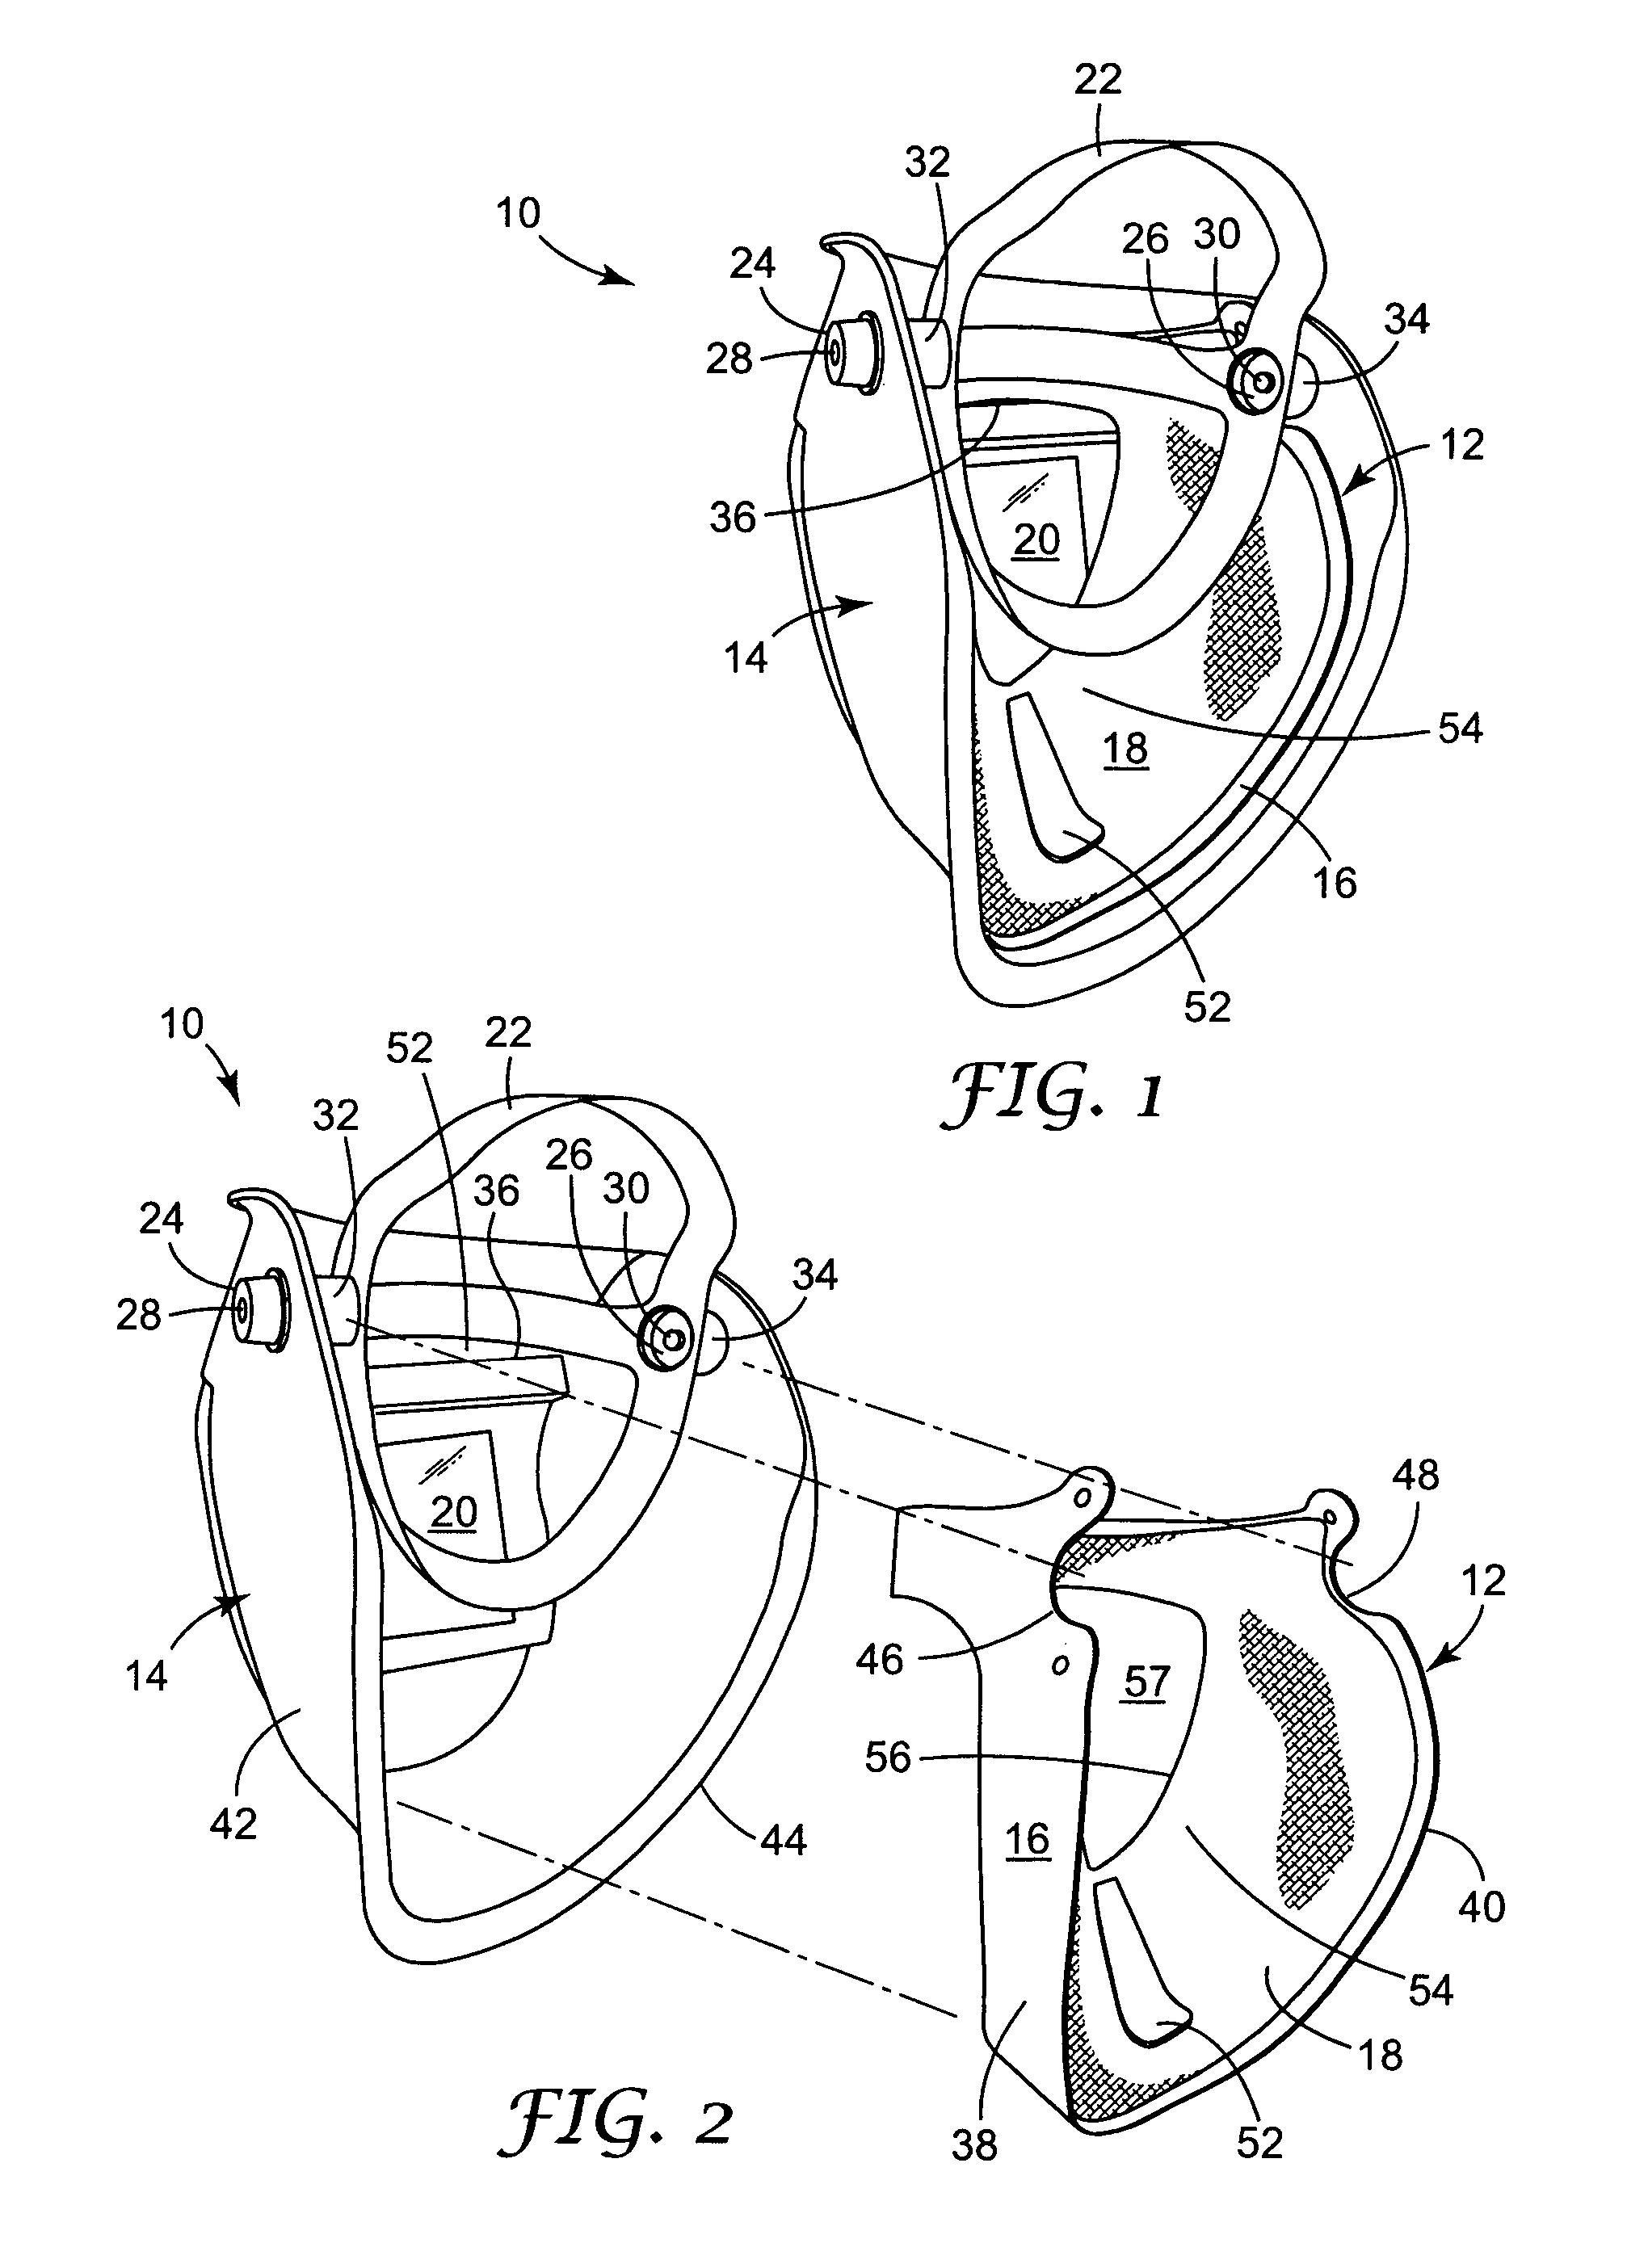 Frictionally engaged supplied air helmet face seal